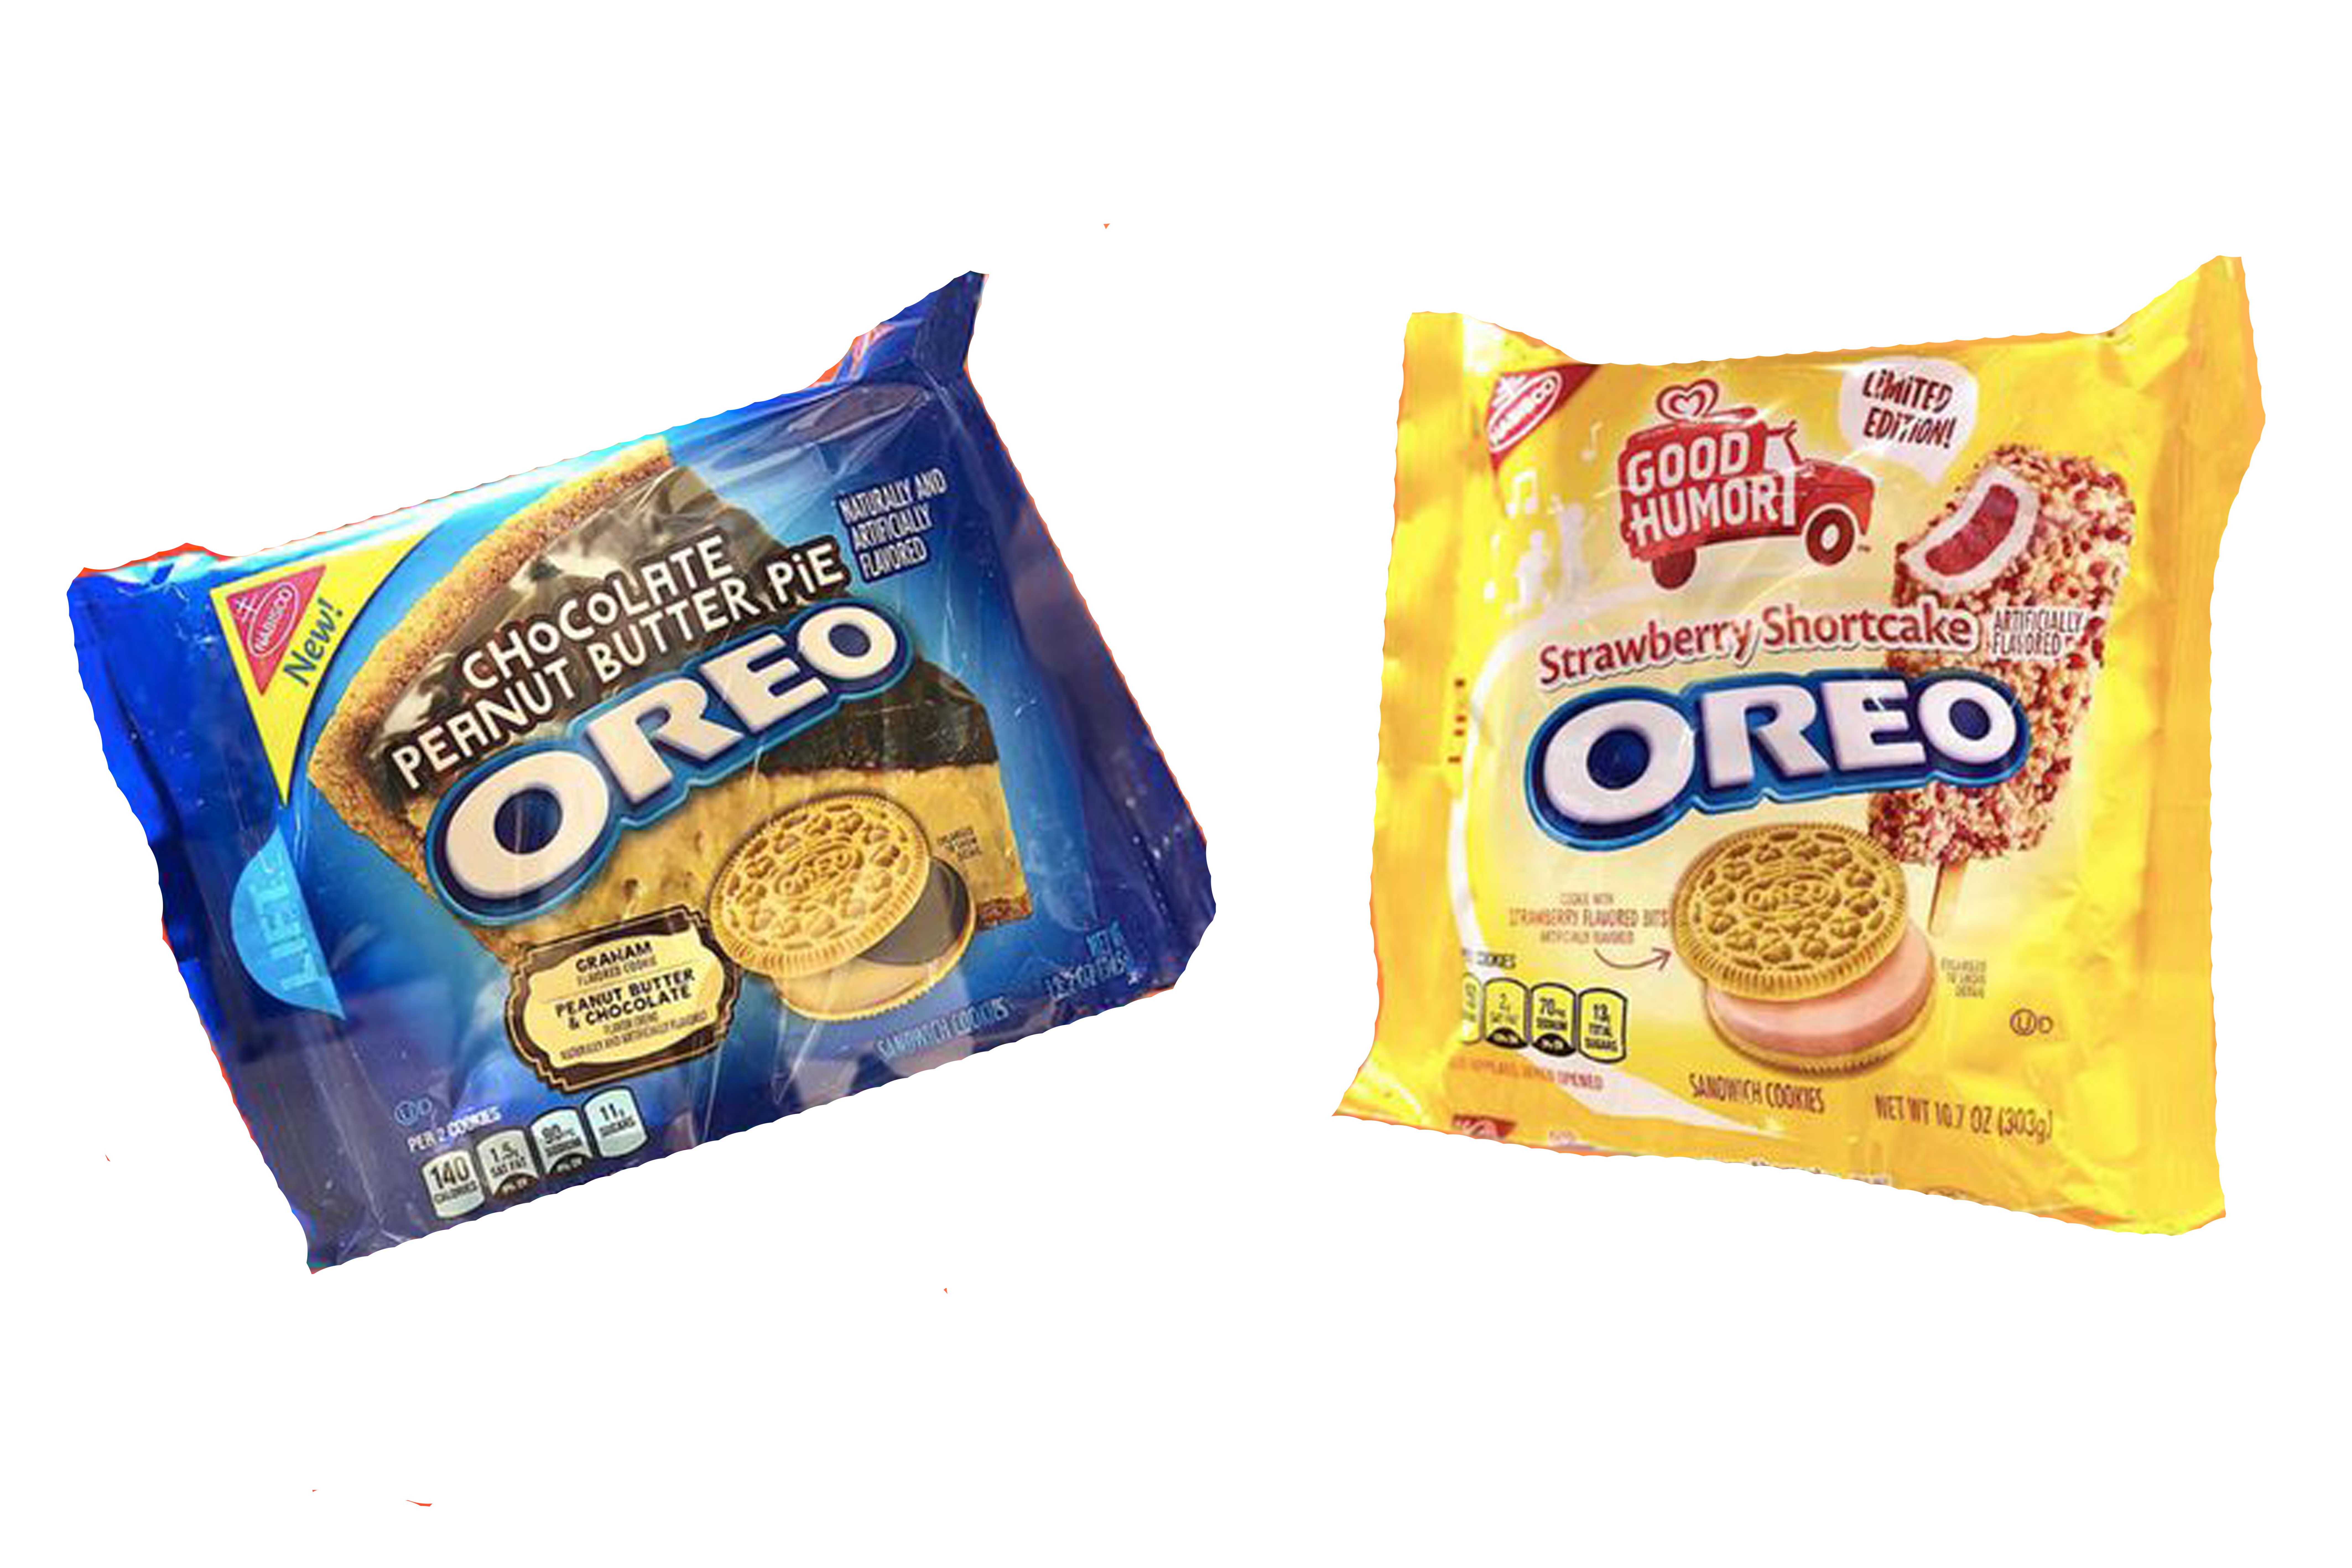 Oreo Announces New Cookie Flavors for 2018  Strawberry Shortcake Peanutbutter Chocolate Cheesecake